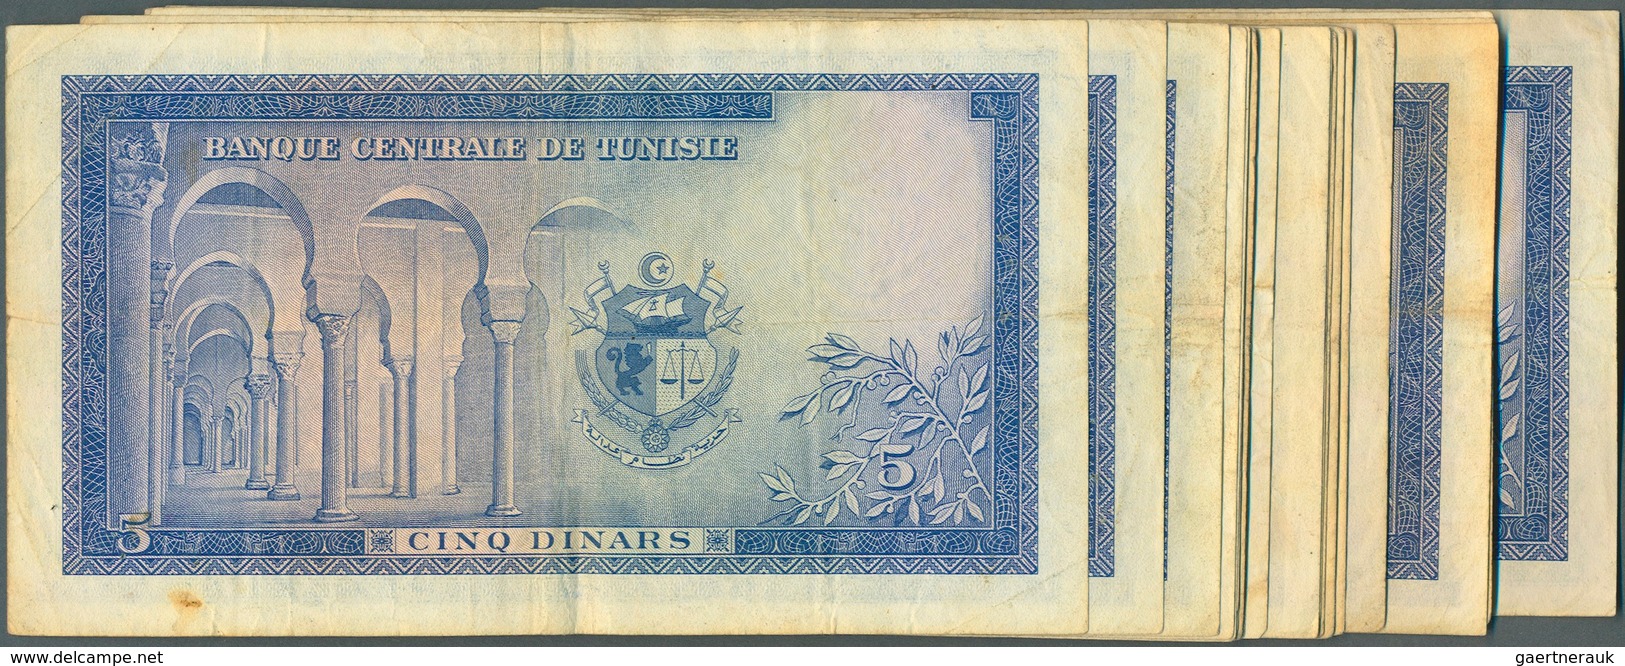 Tunisia / Tunisien: Lot With 23 X 5 Dinars 1962, P.61 In Used Condition With Several Handling Marks, - Tunisia